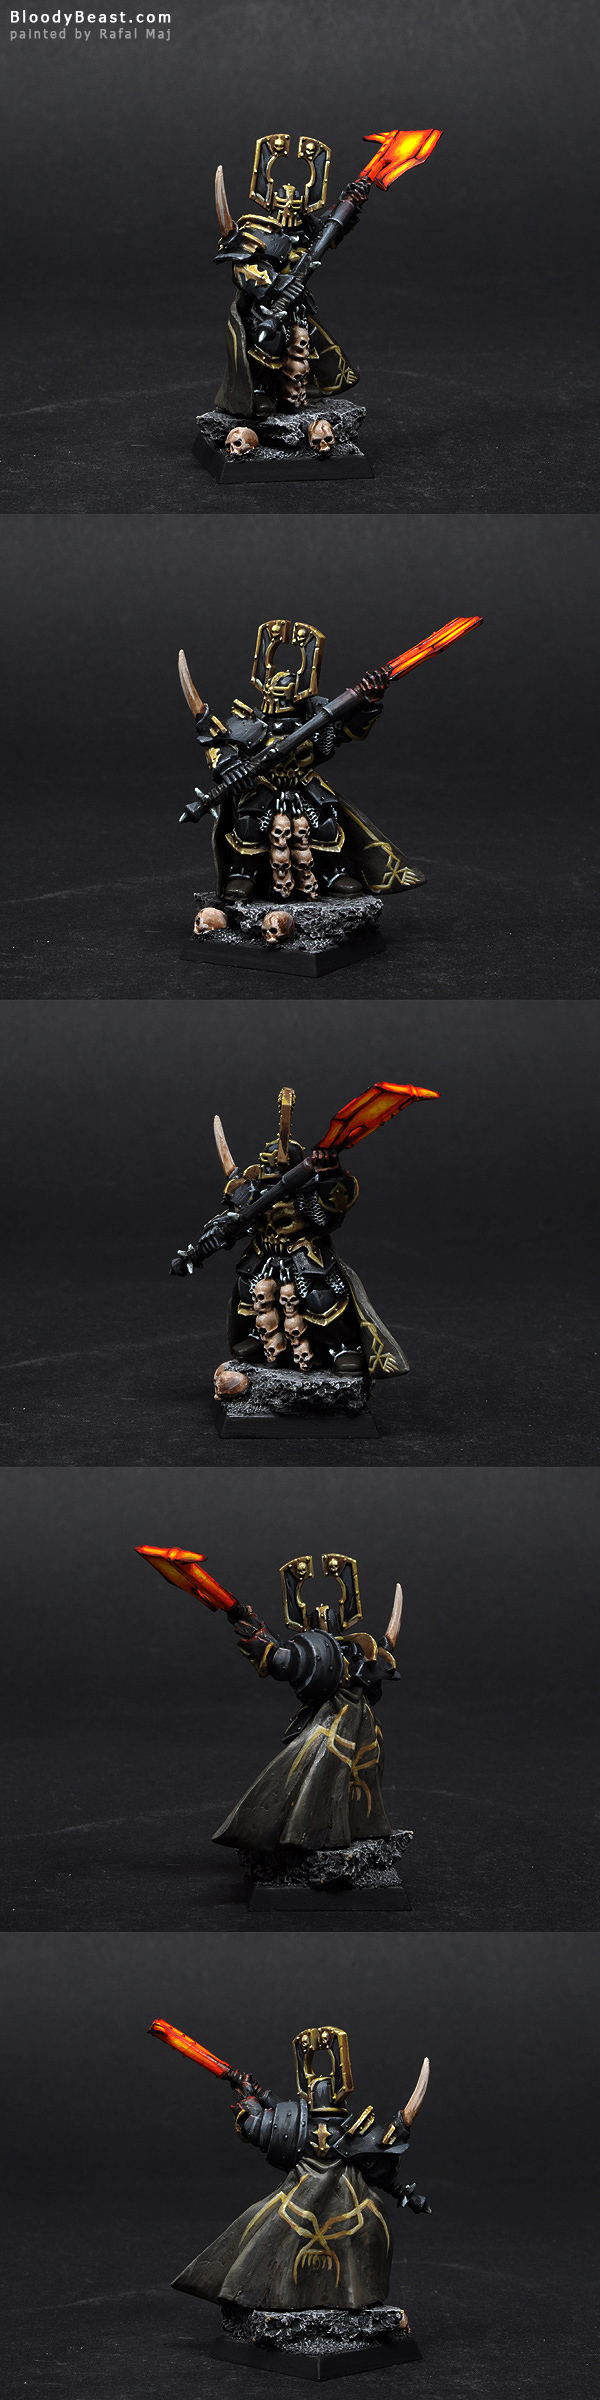 Chaos Lord of Khorne painted by Rafal Maj (BloodyBeast.com)